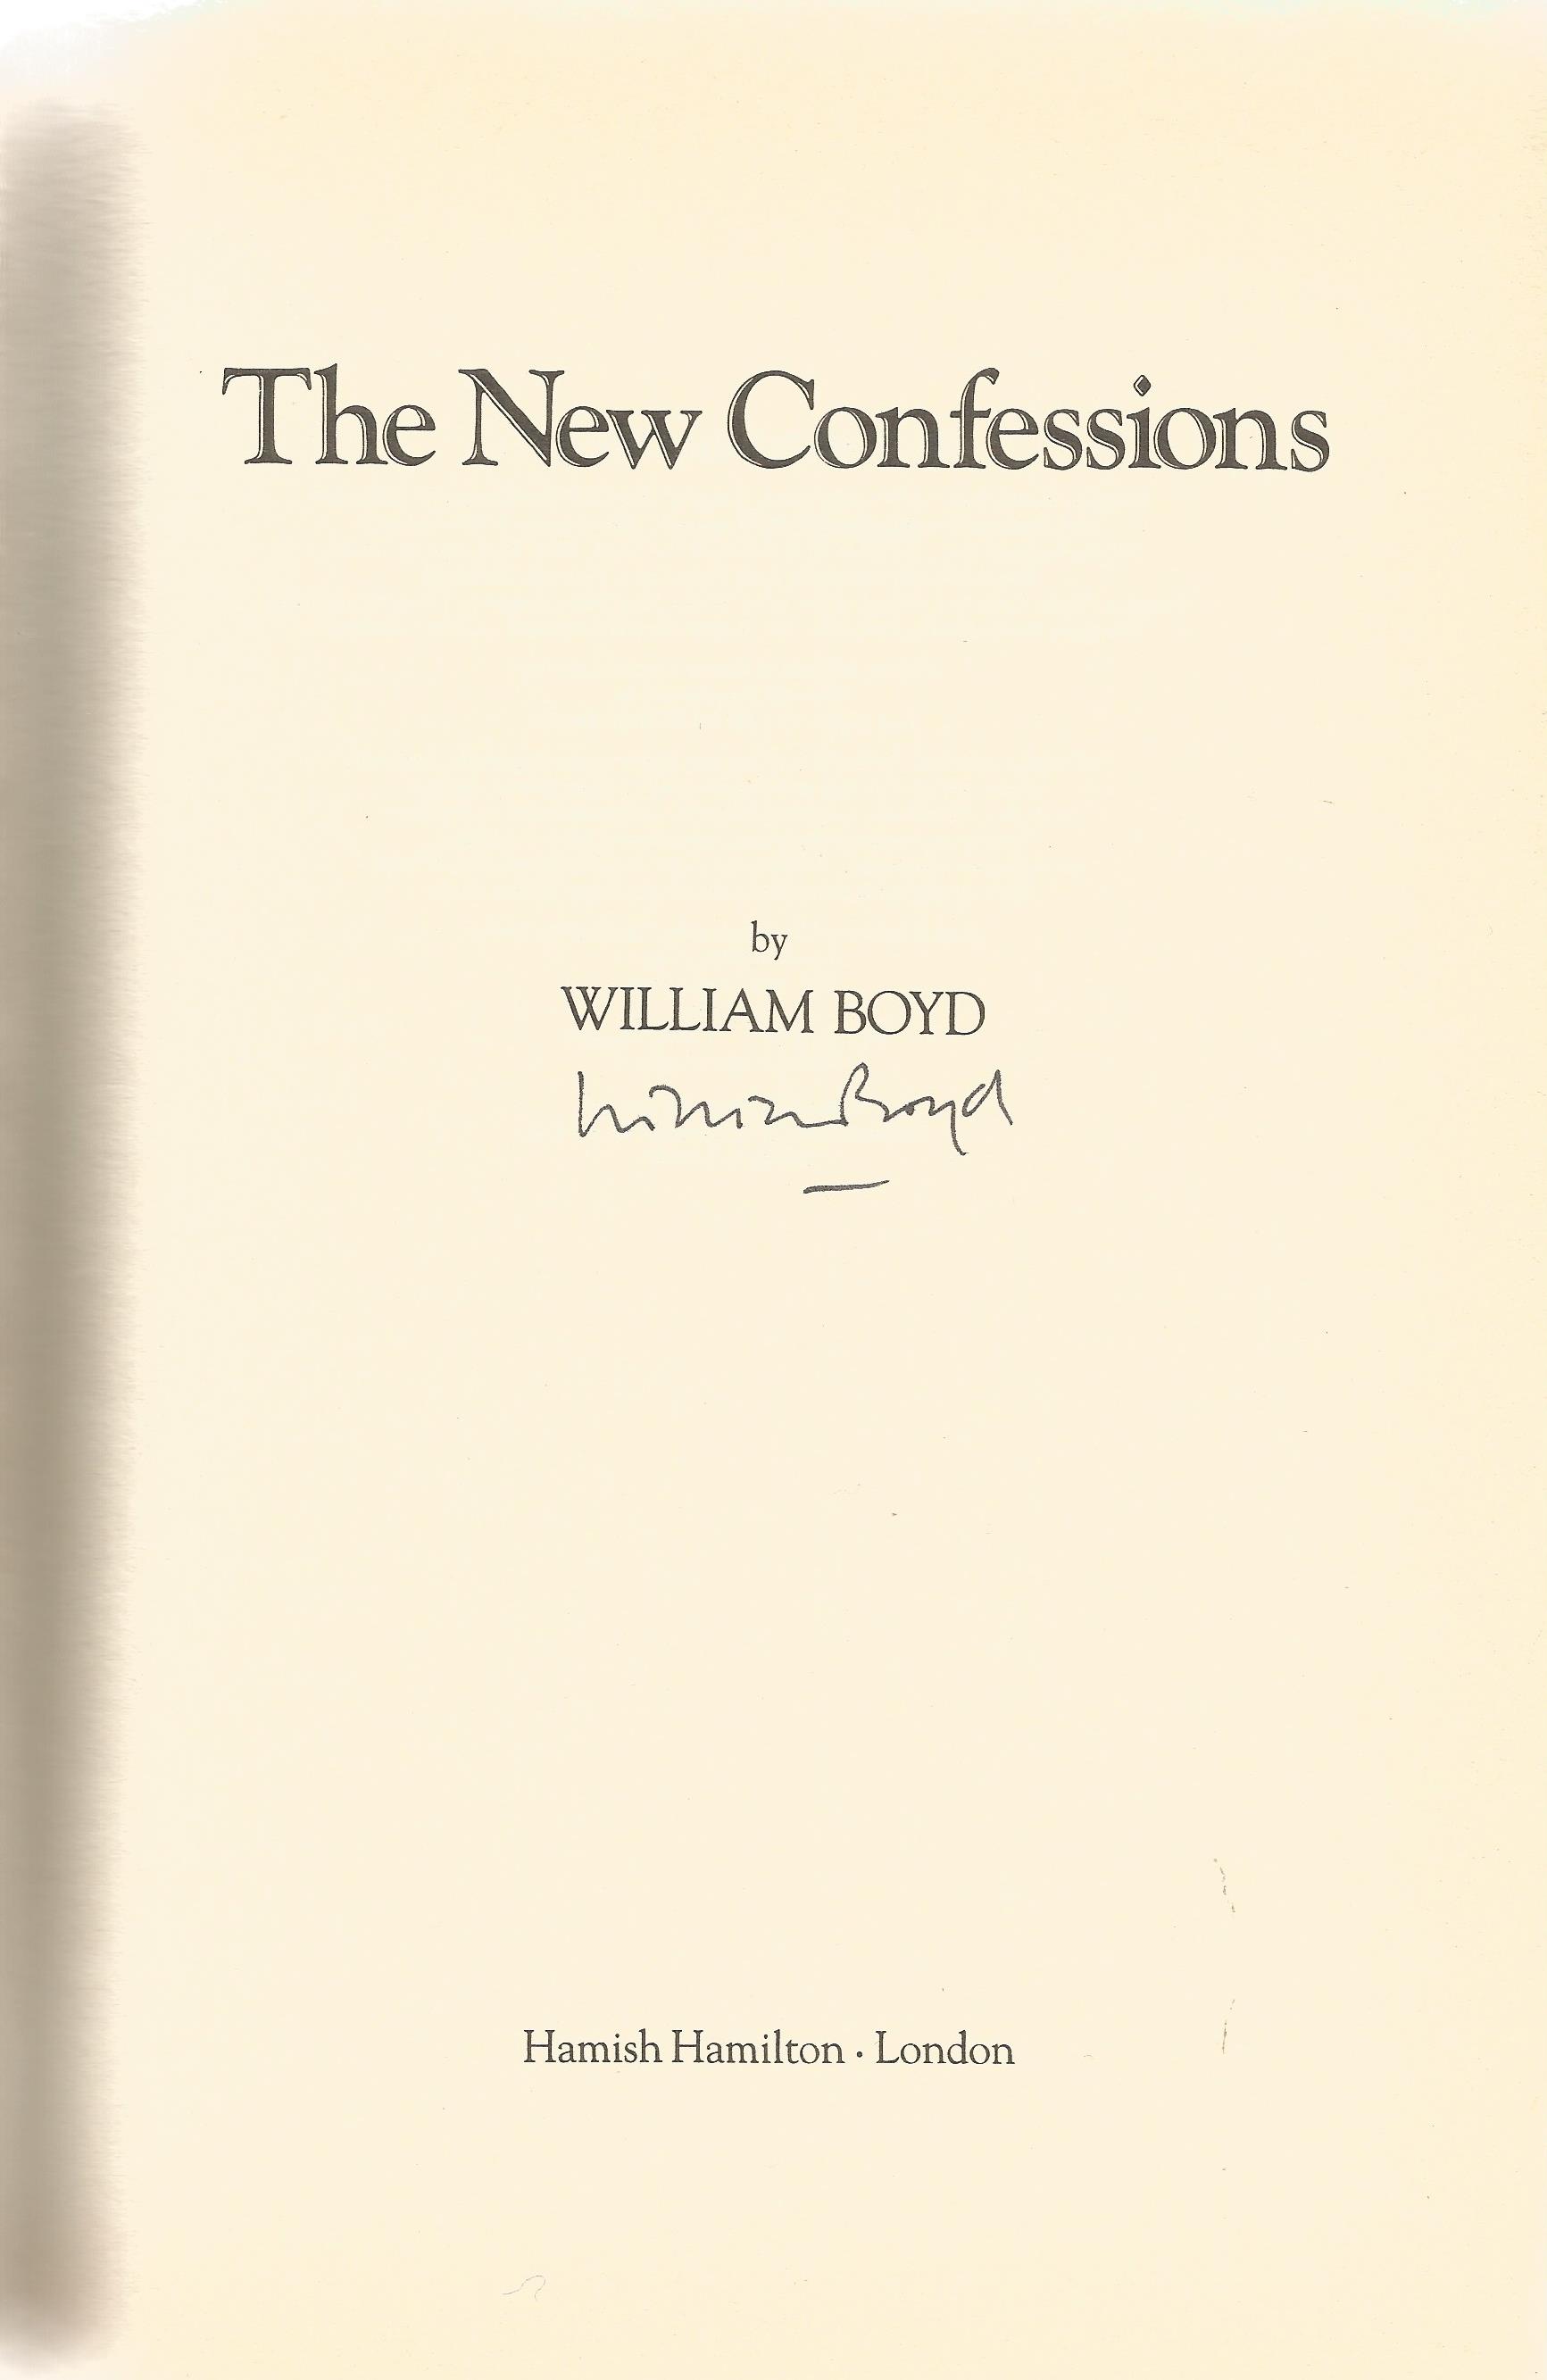 William Boyd Hardback Book The New Confessions signed by the Author on the Title Page dust cover and - Image 2 of 2